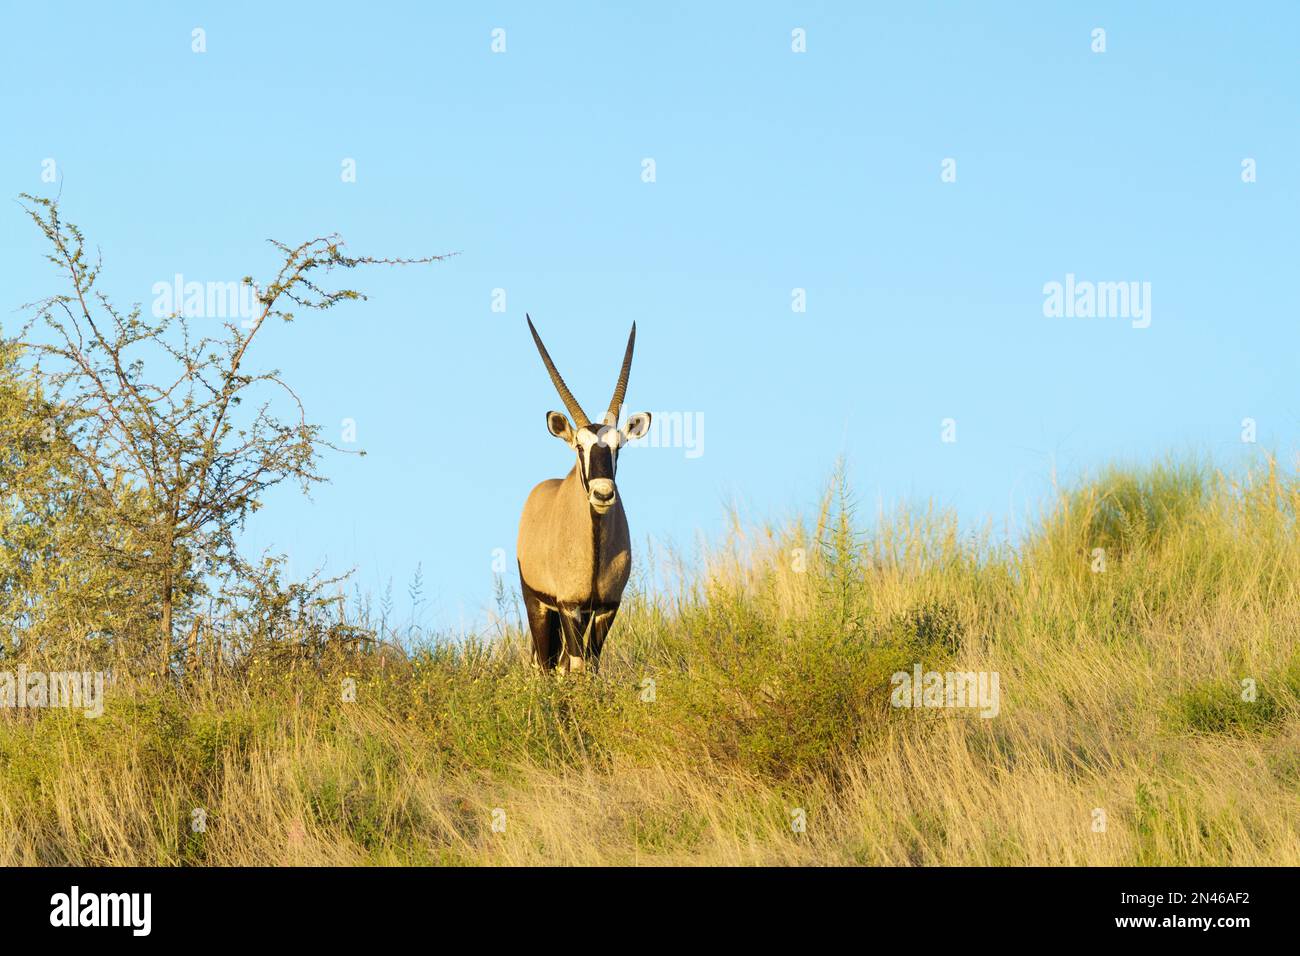 Oryx gazelle stands on top of a hill observing, looking down into camera. Kalahari, South Africa Stock Photo